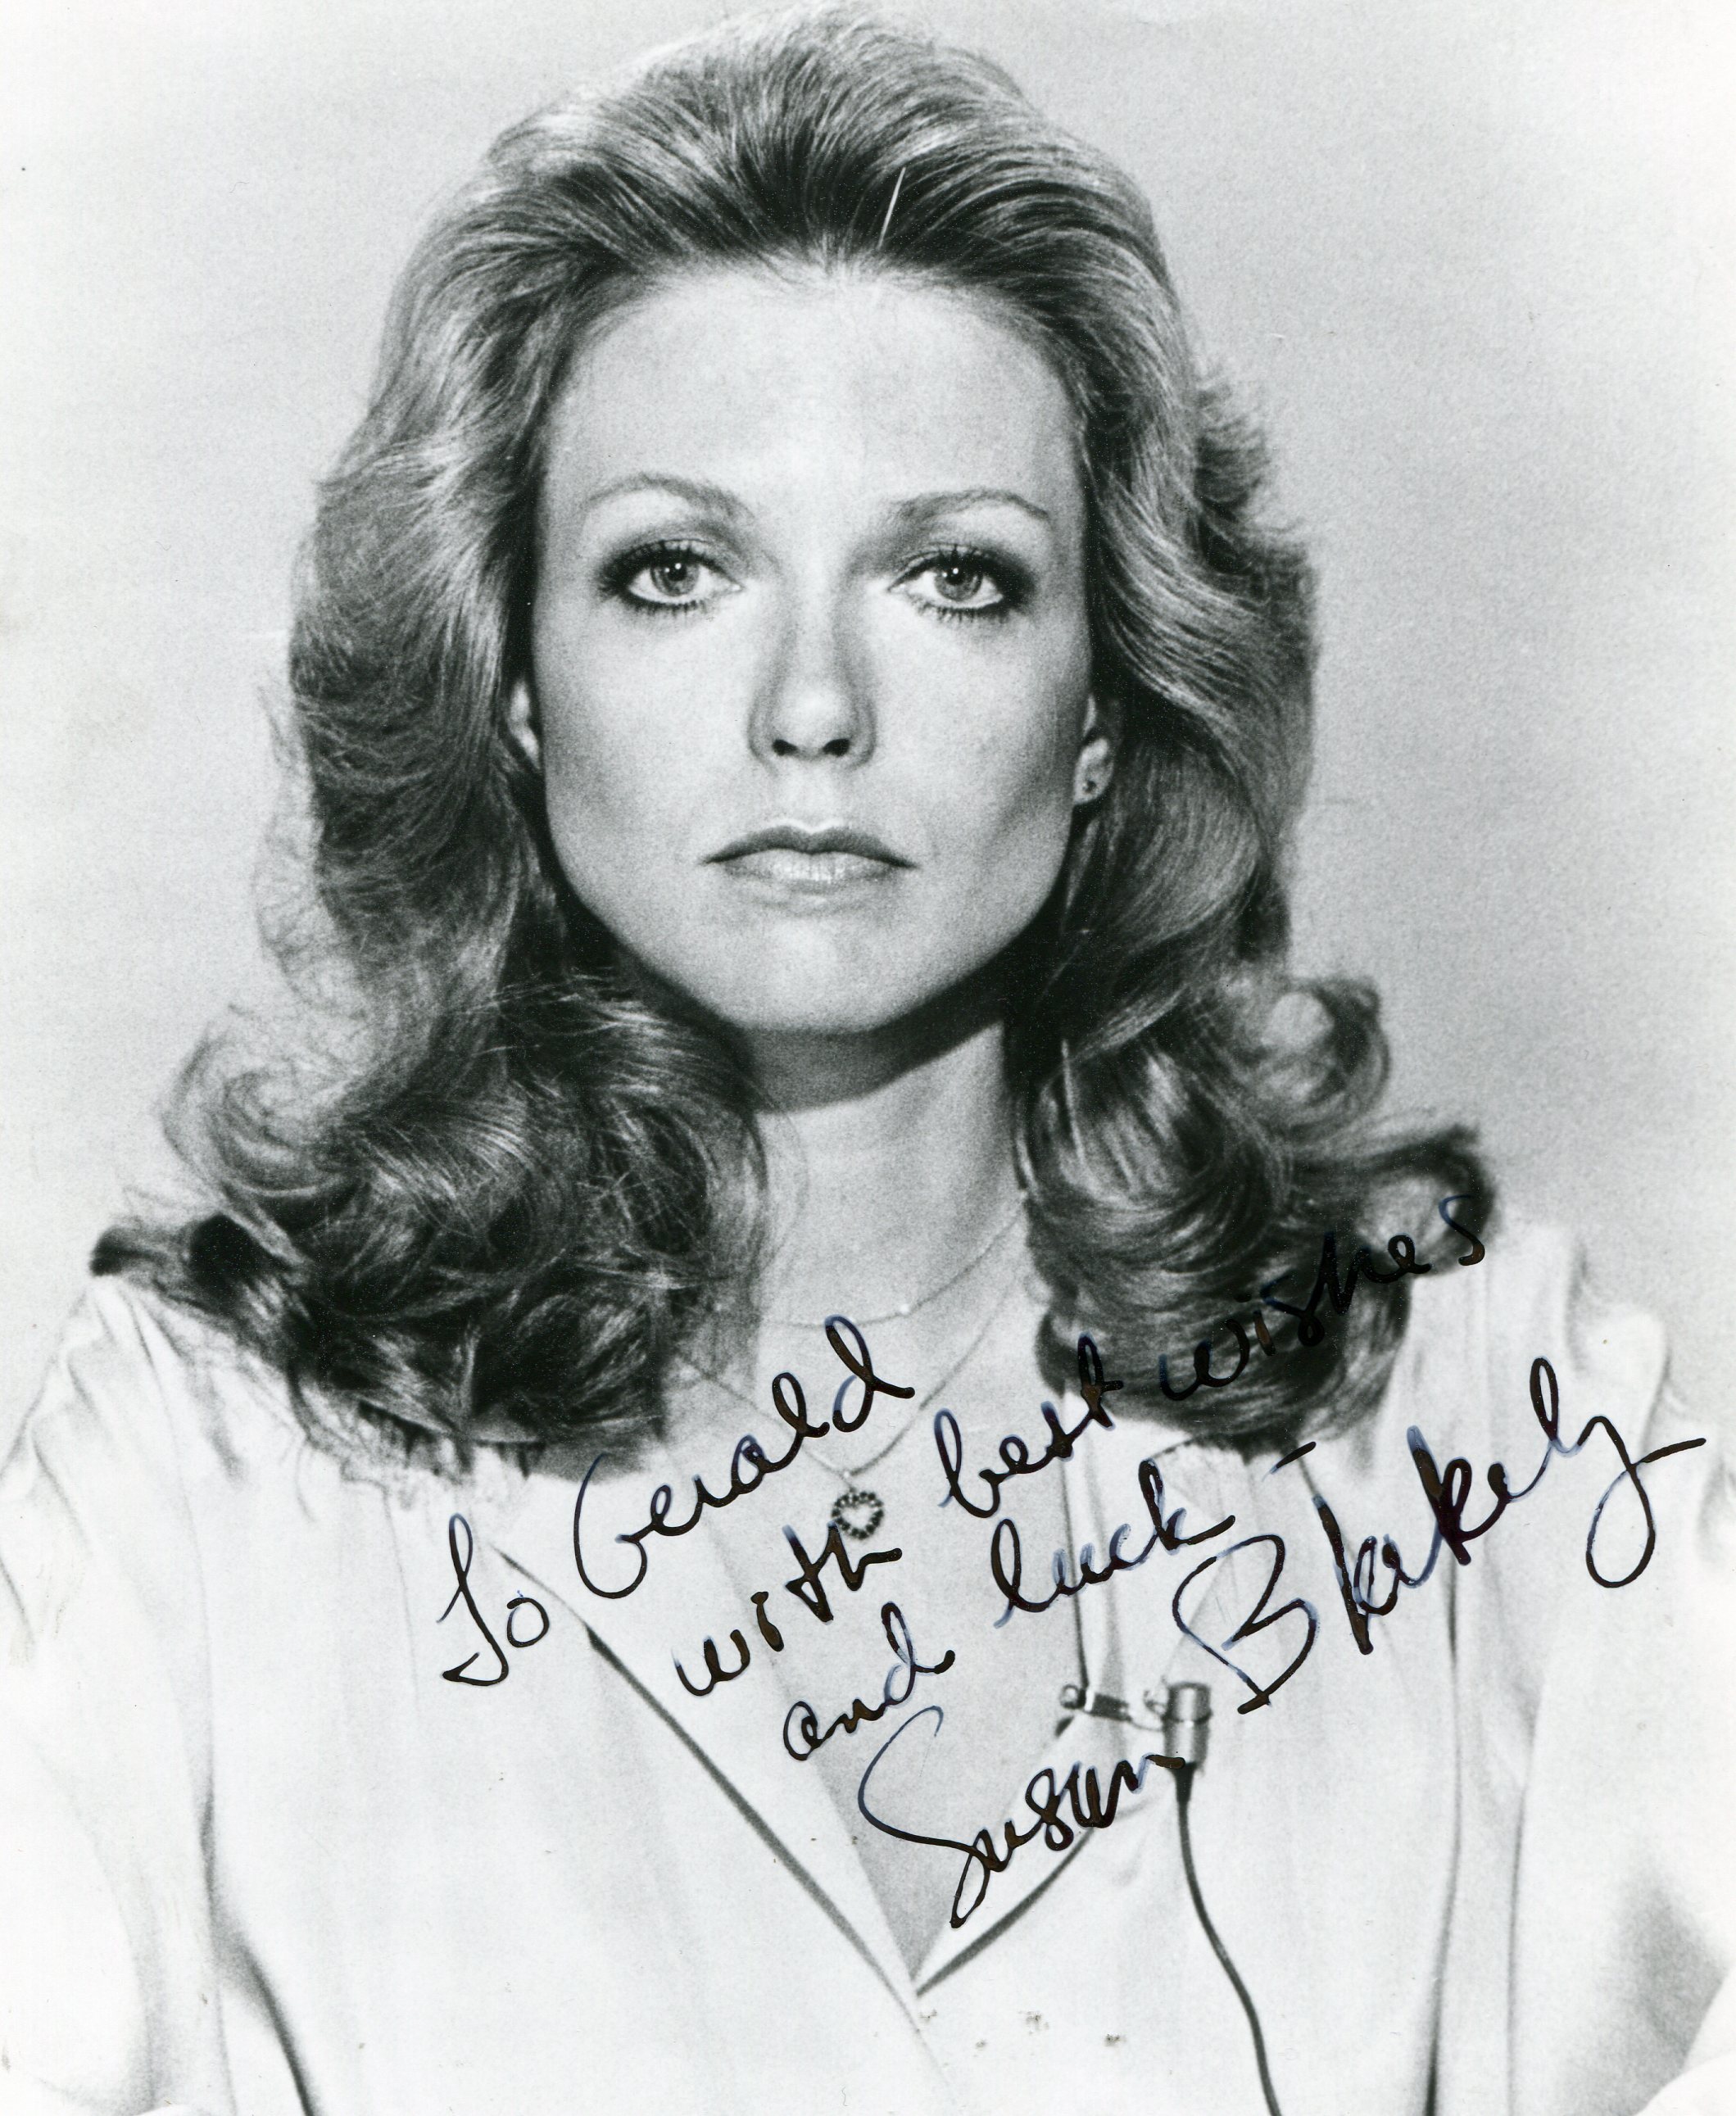 Susan pictures blakely of Best 52+